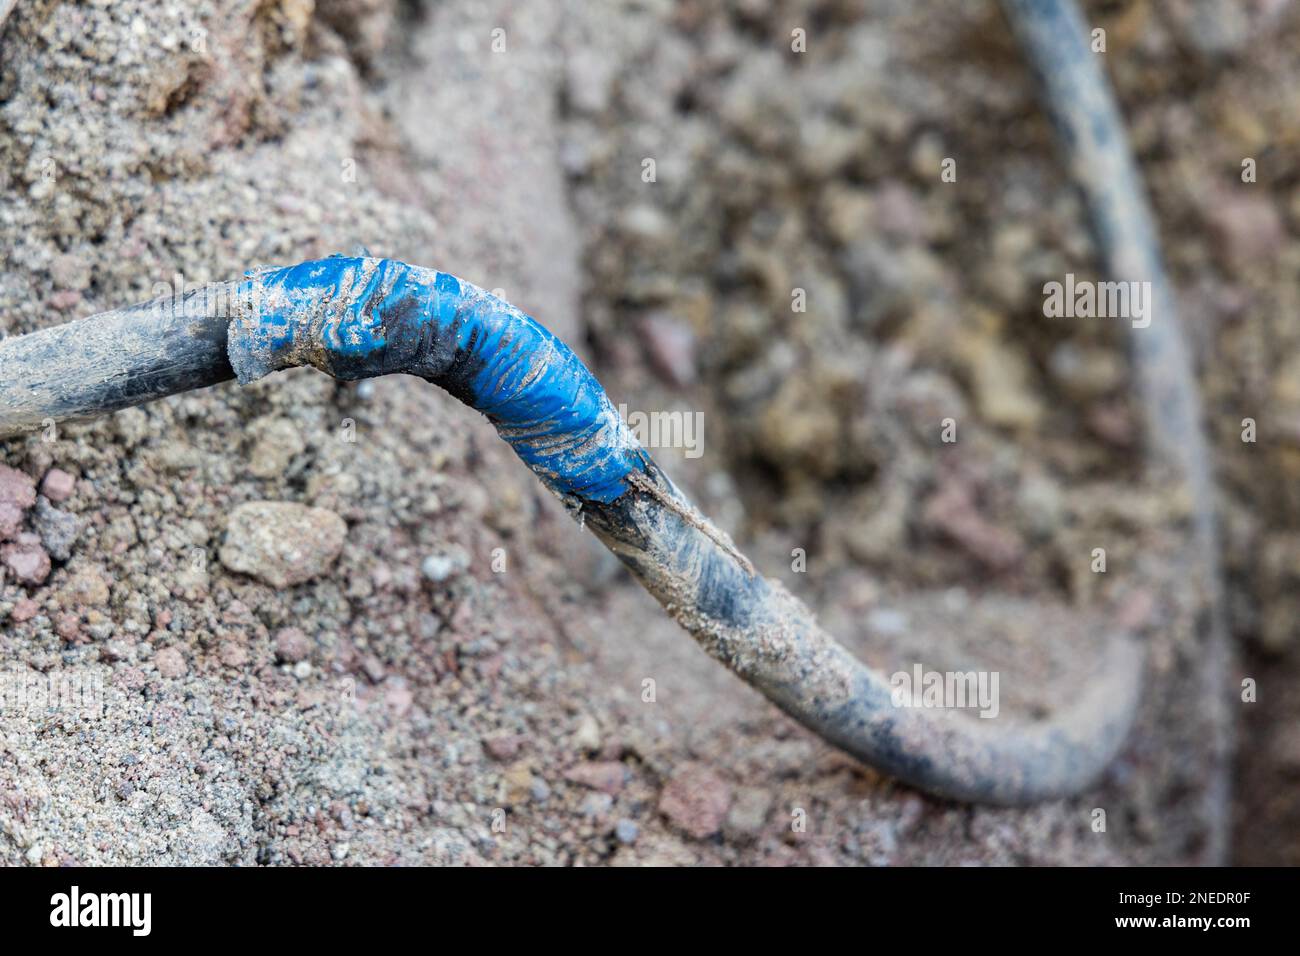 Improper repair of cable after excavator damage Stock Photo